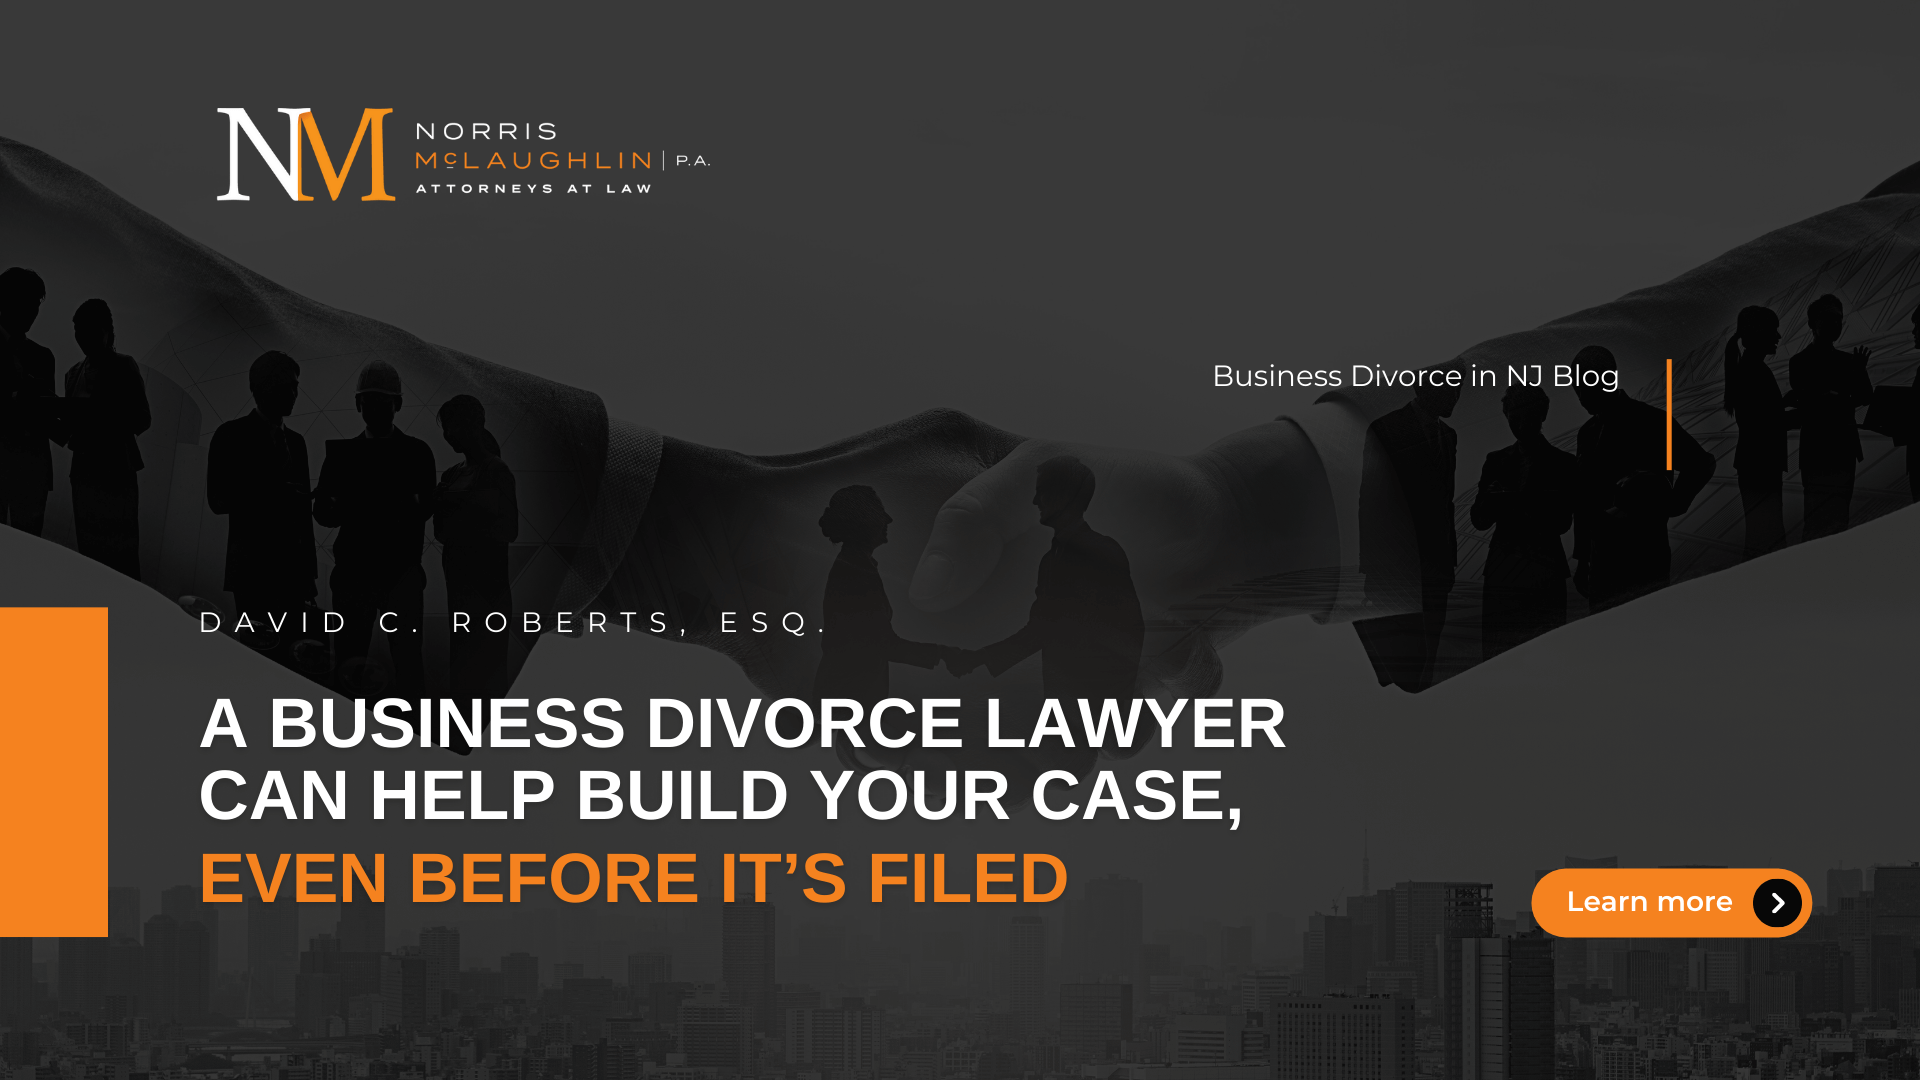 A Business Divorce Lawyer Can Help Build Your Case, Even Before It’s Filed